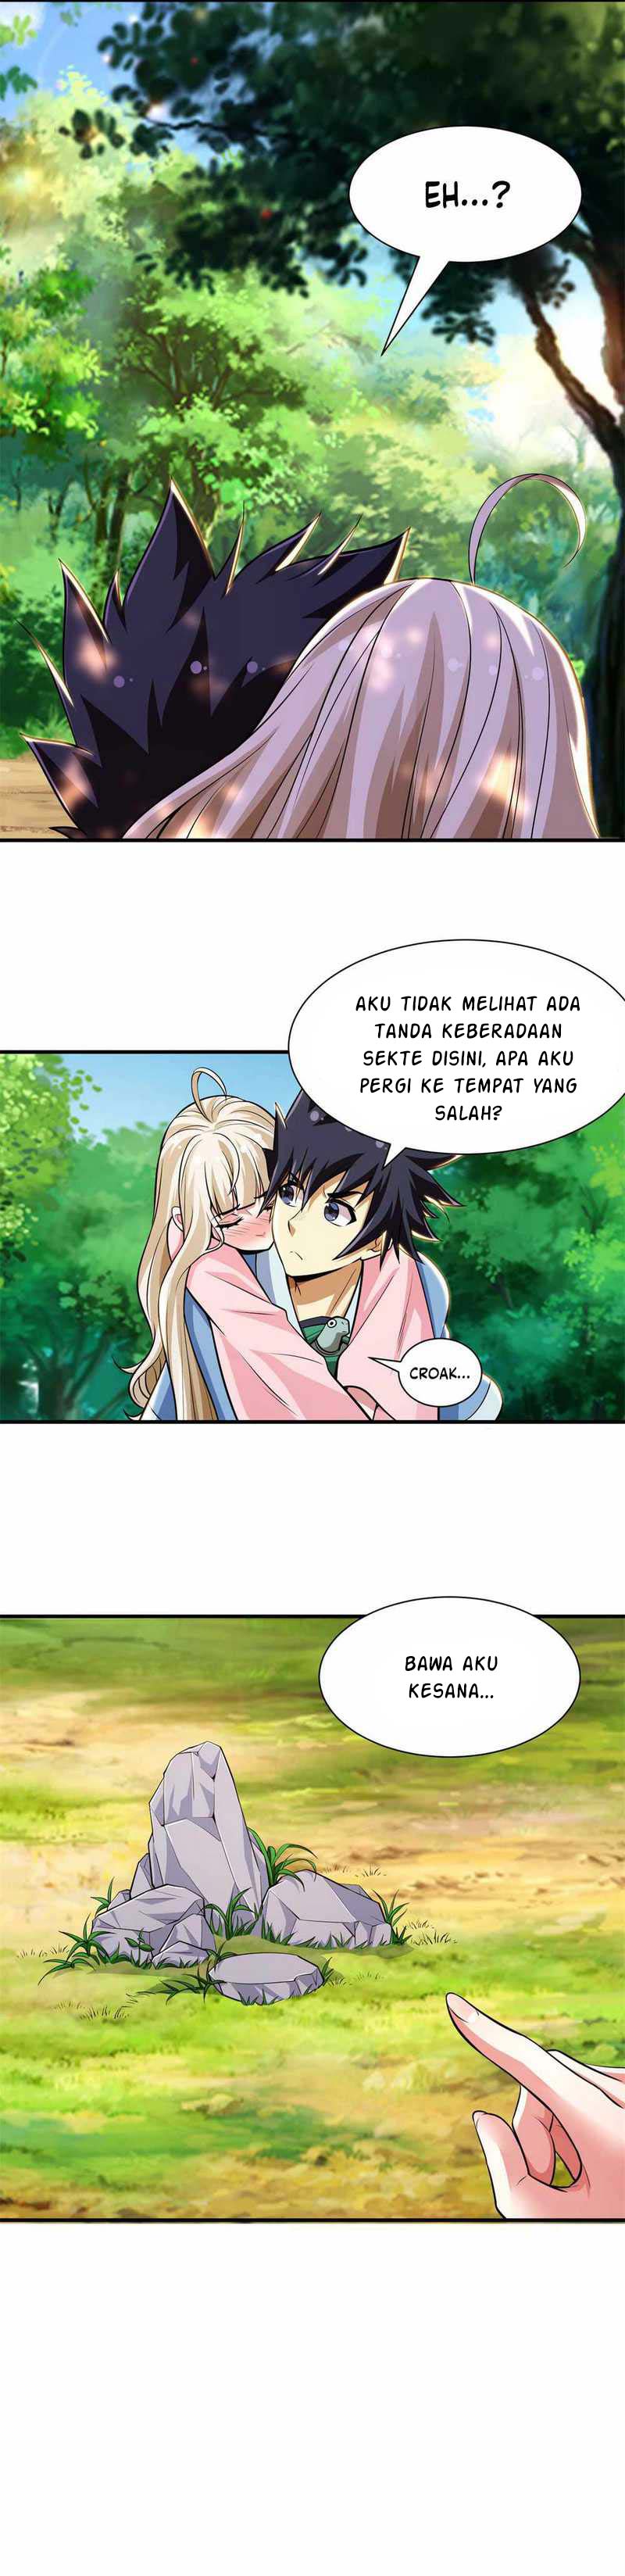 Dilarang COPAS - situs resmi www.mangacanblog.com - Komik i just want to be beaten to death by everyone 026 - chapter 26 27 Indonesia i just want to be beaten to death by everyone 026 - chapter 26 Terbaru 9|Baca Manga Komik Indonesia|Mangacan